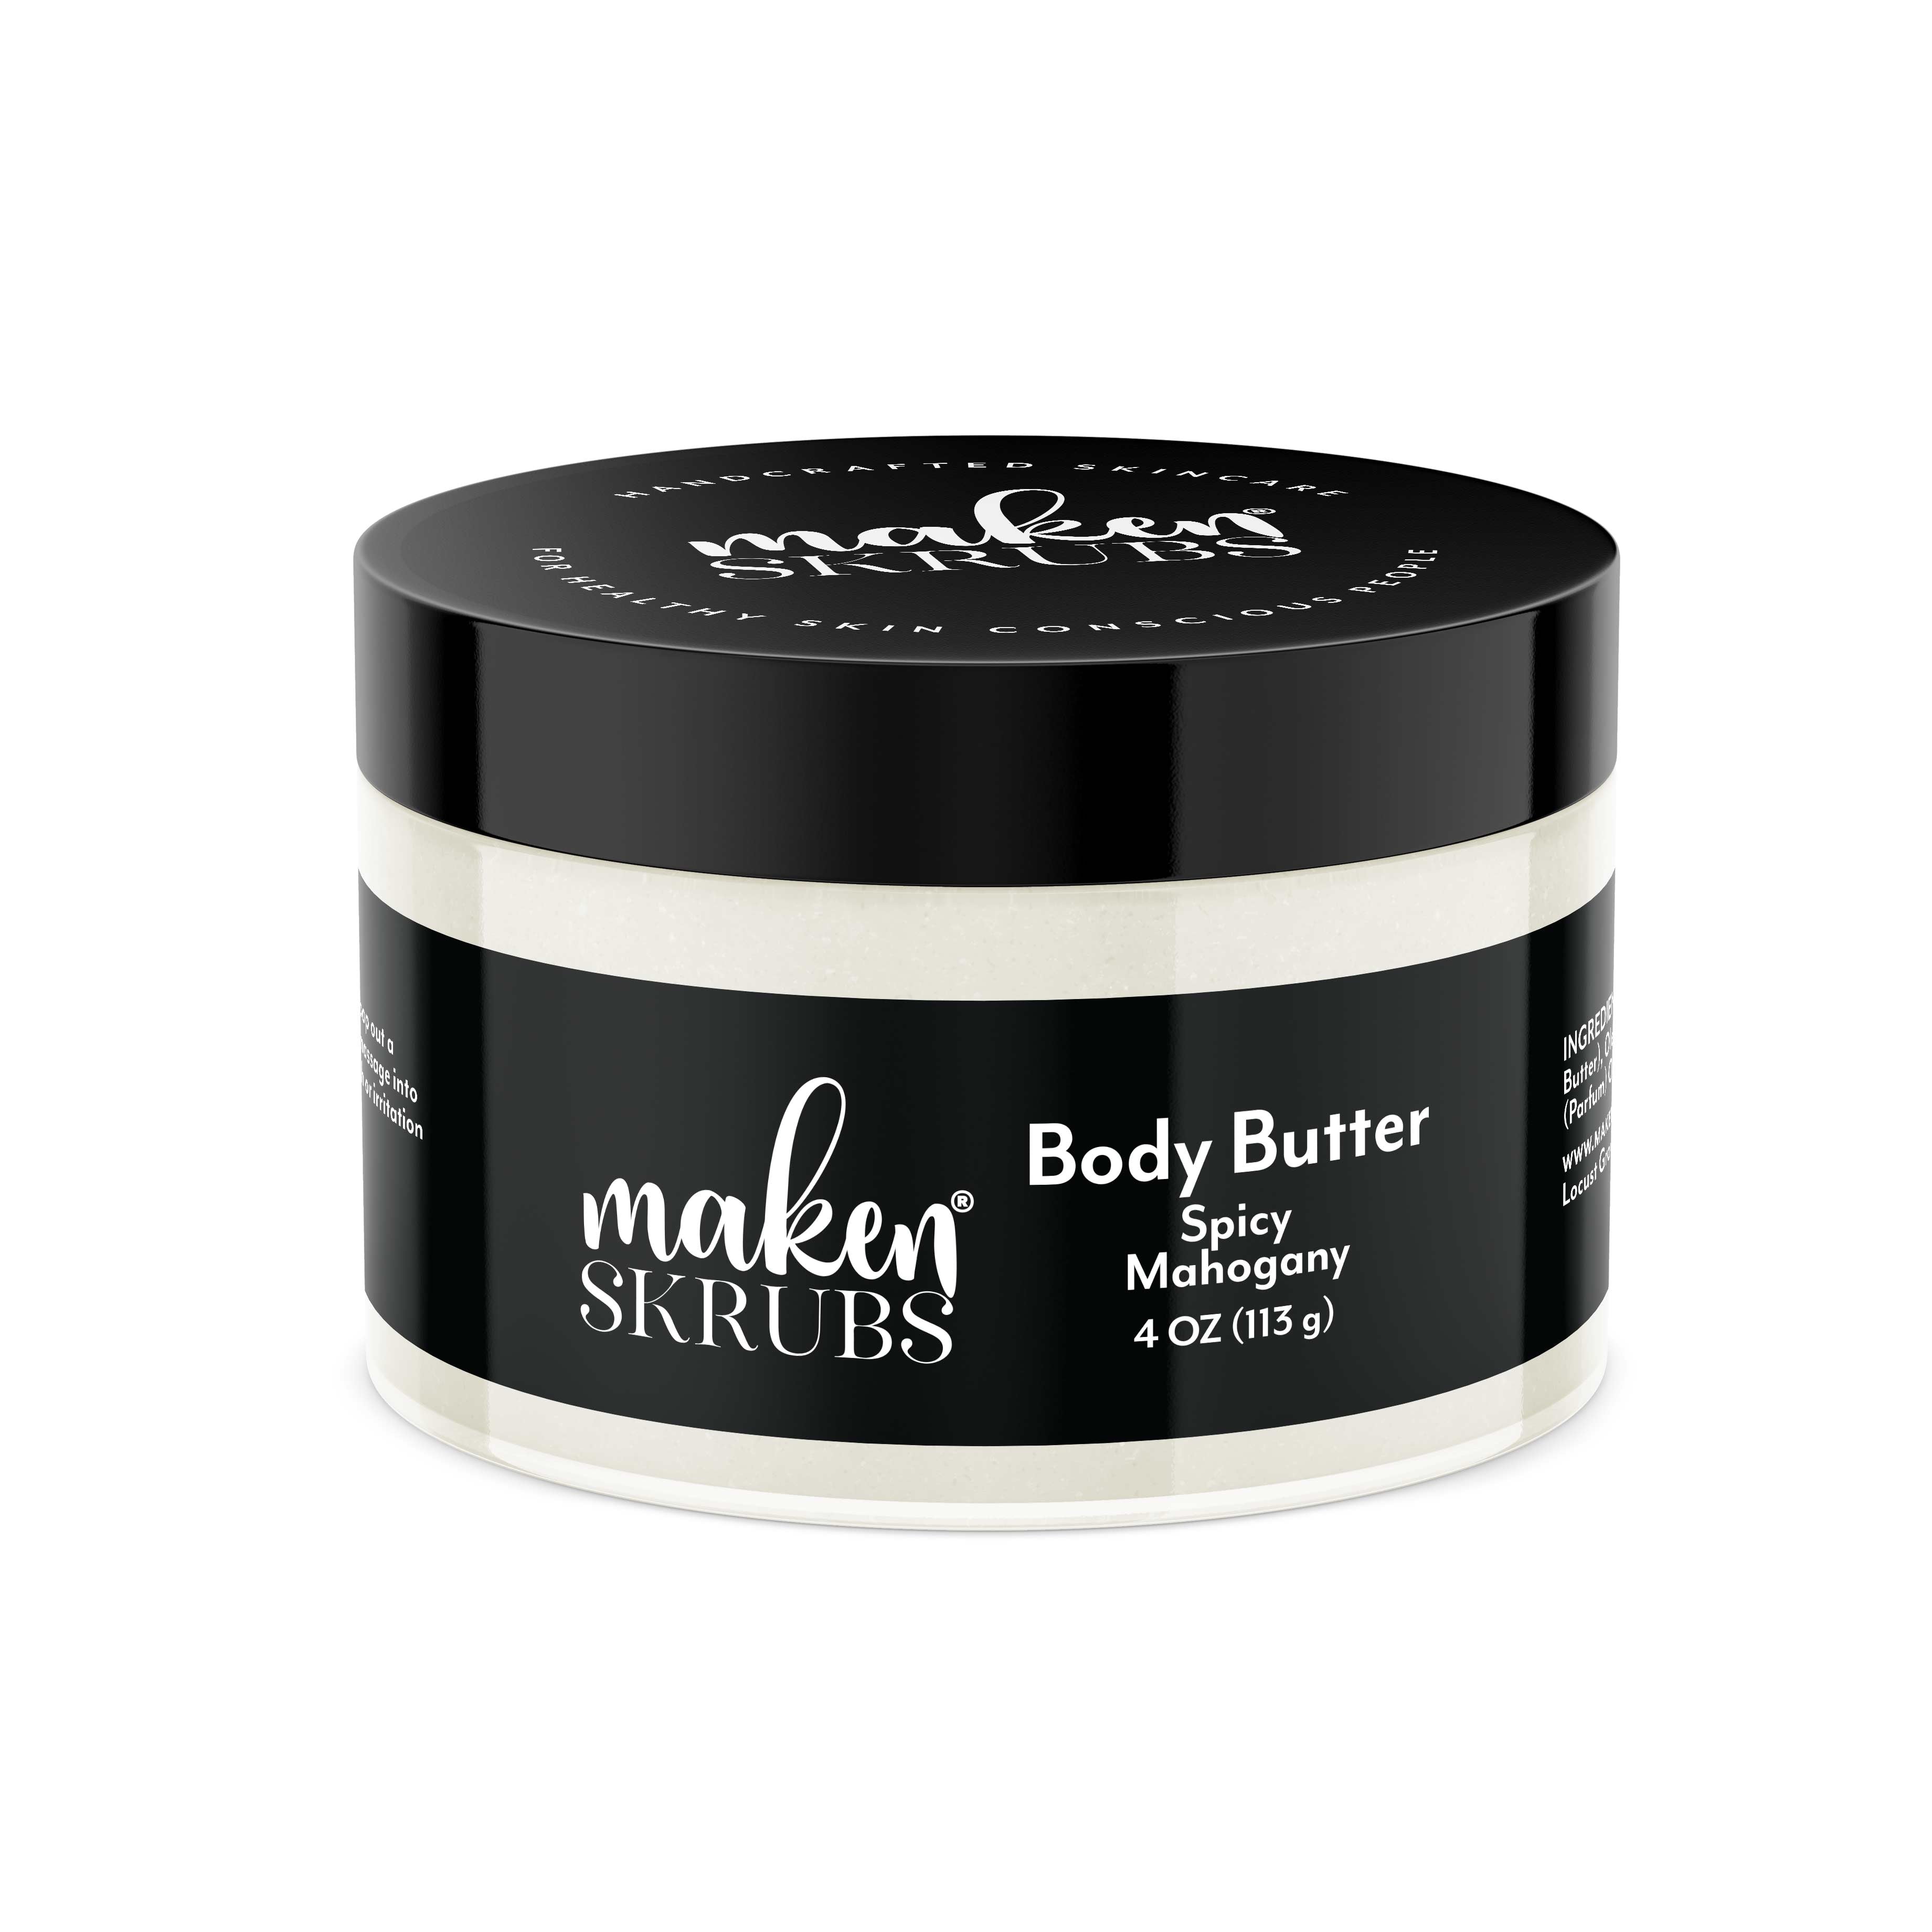 Spicy Mahogany Whipped Body Butter